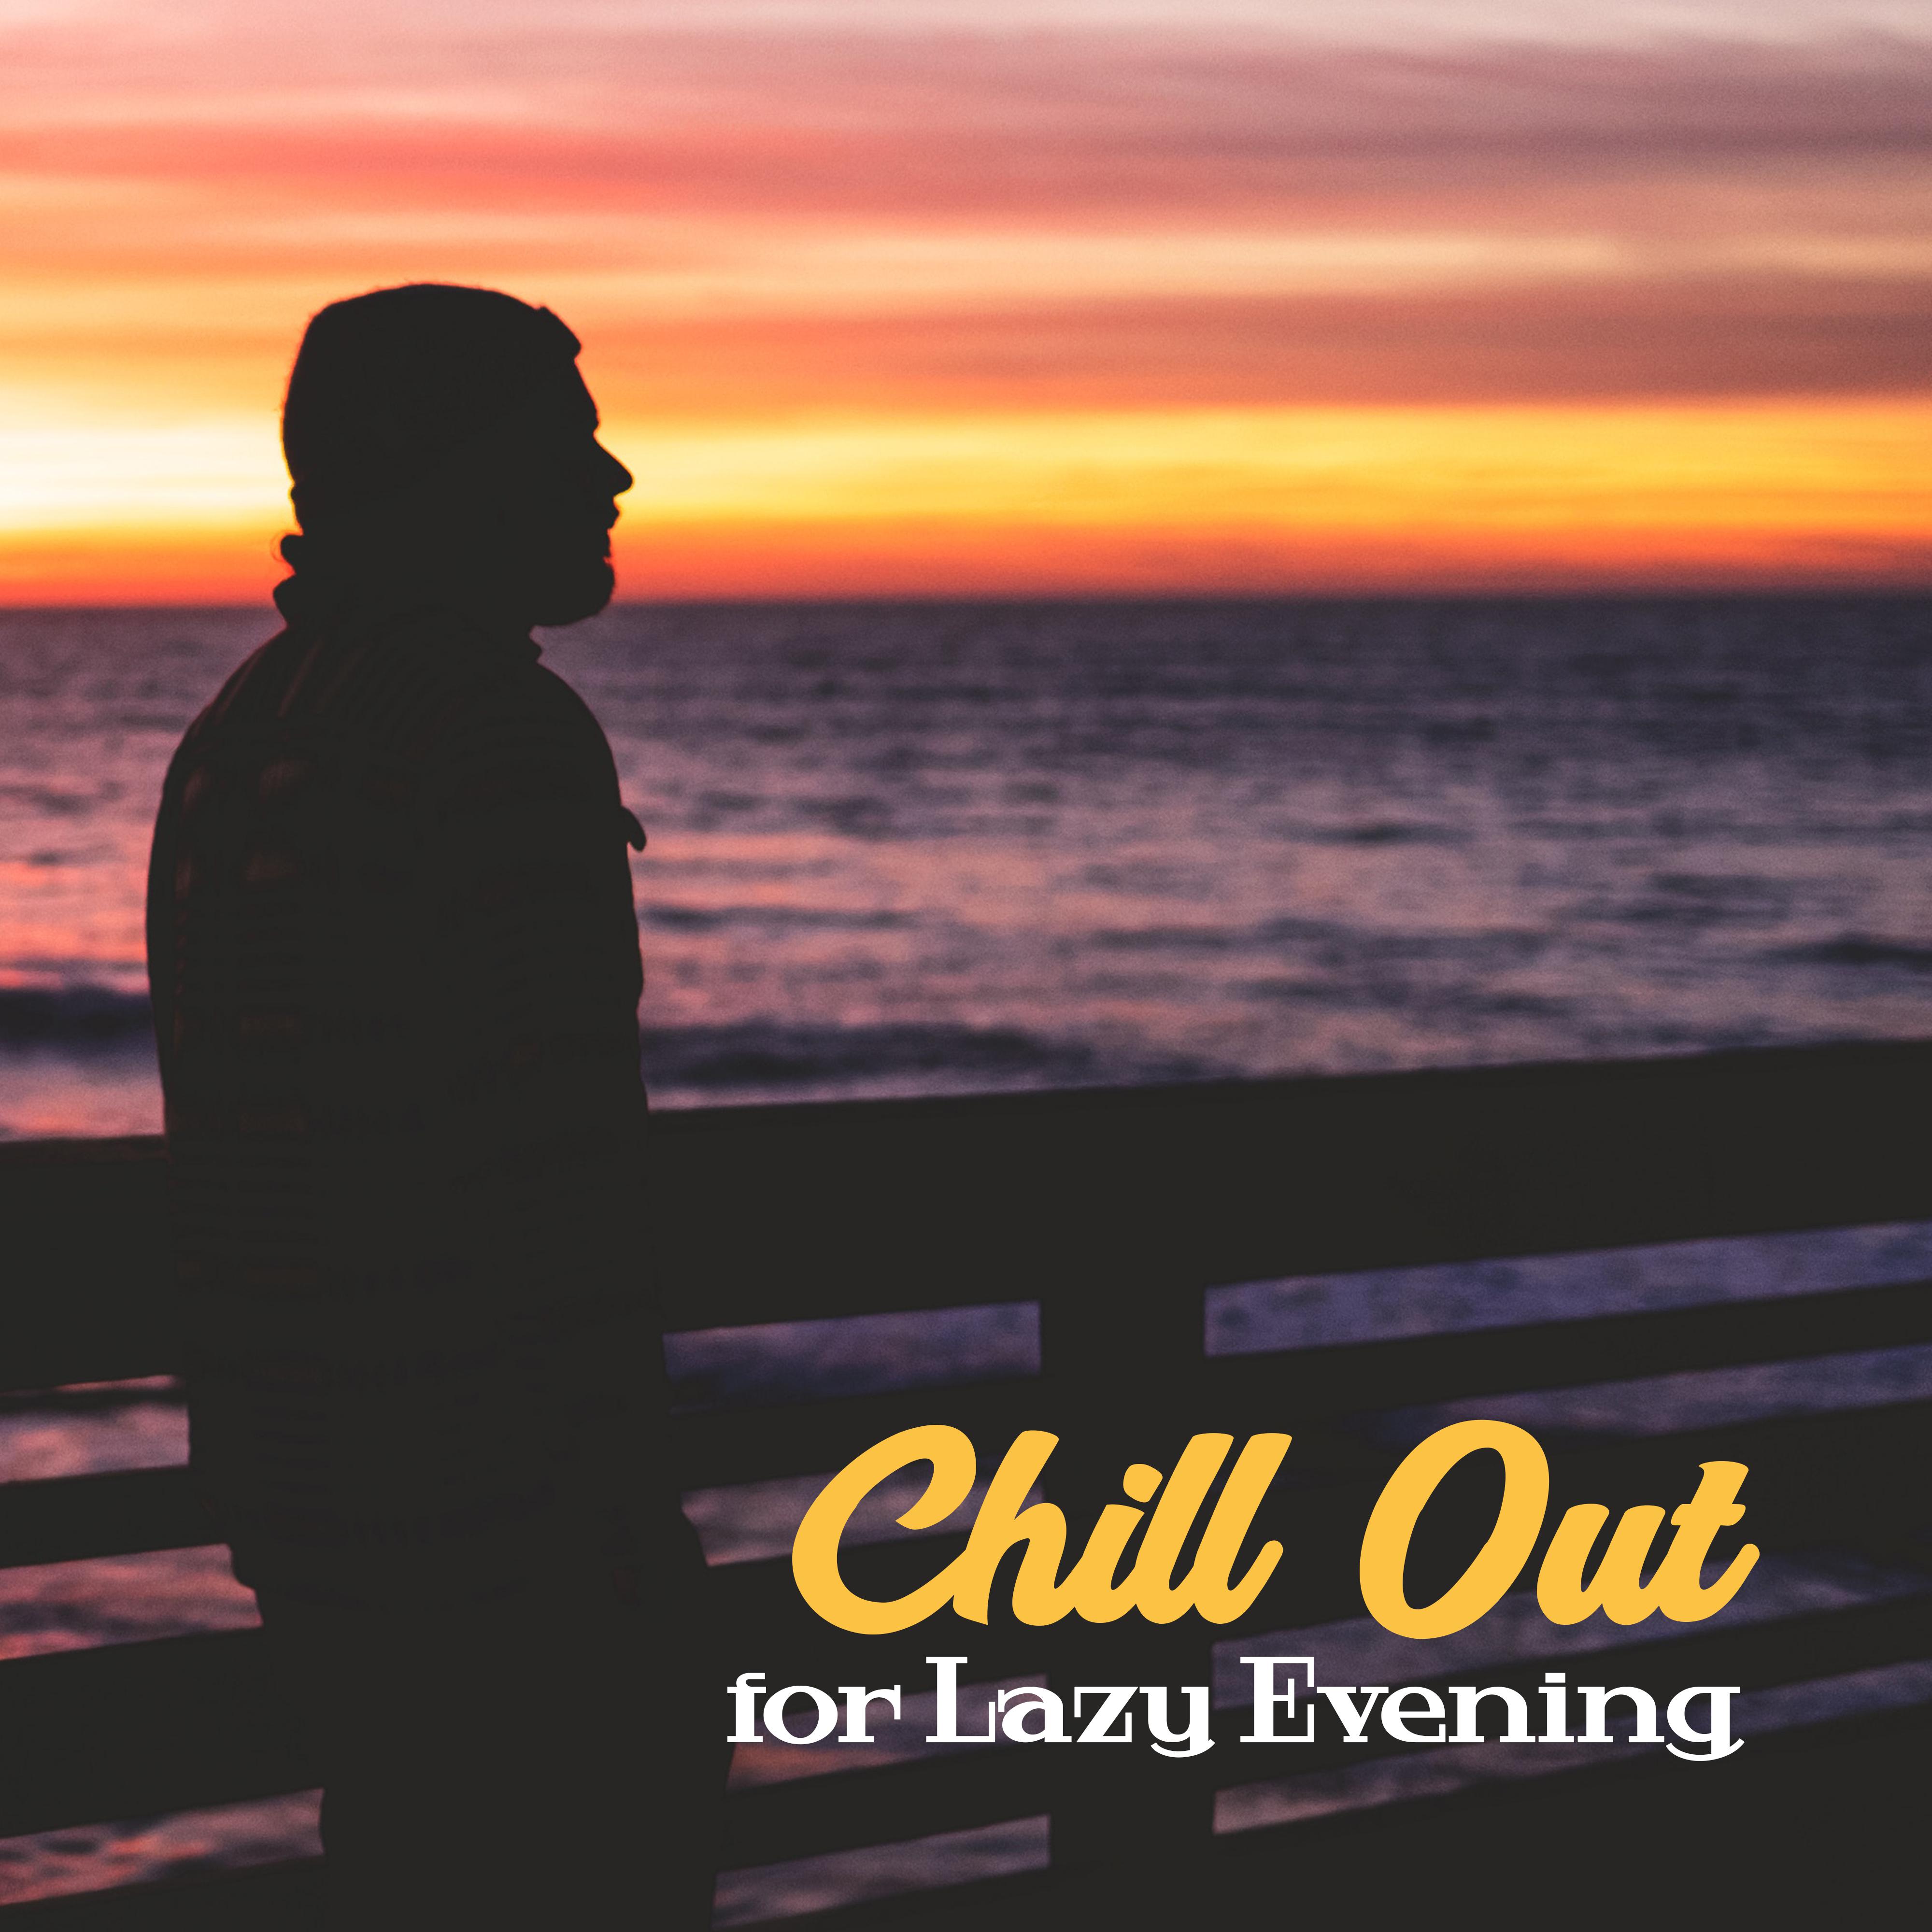 Chill Out for Lazy Evening – Calm Sounds to Relax, Chill Out Melodies, Evening Vibes, Stress Relief